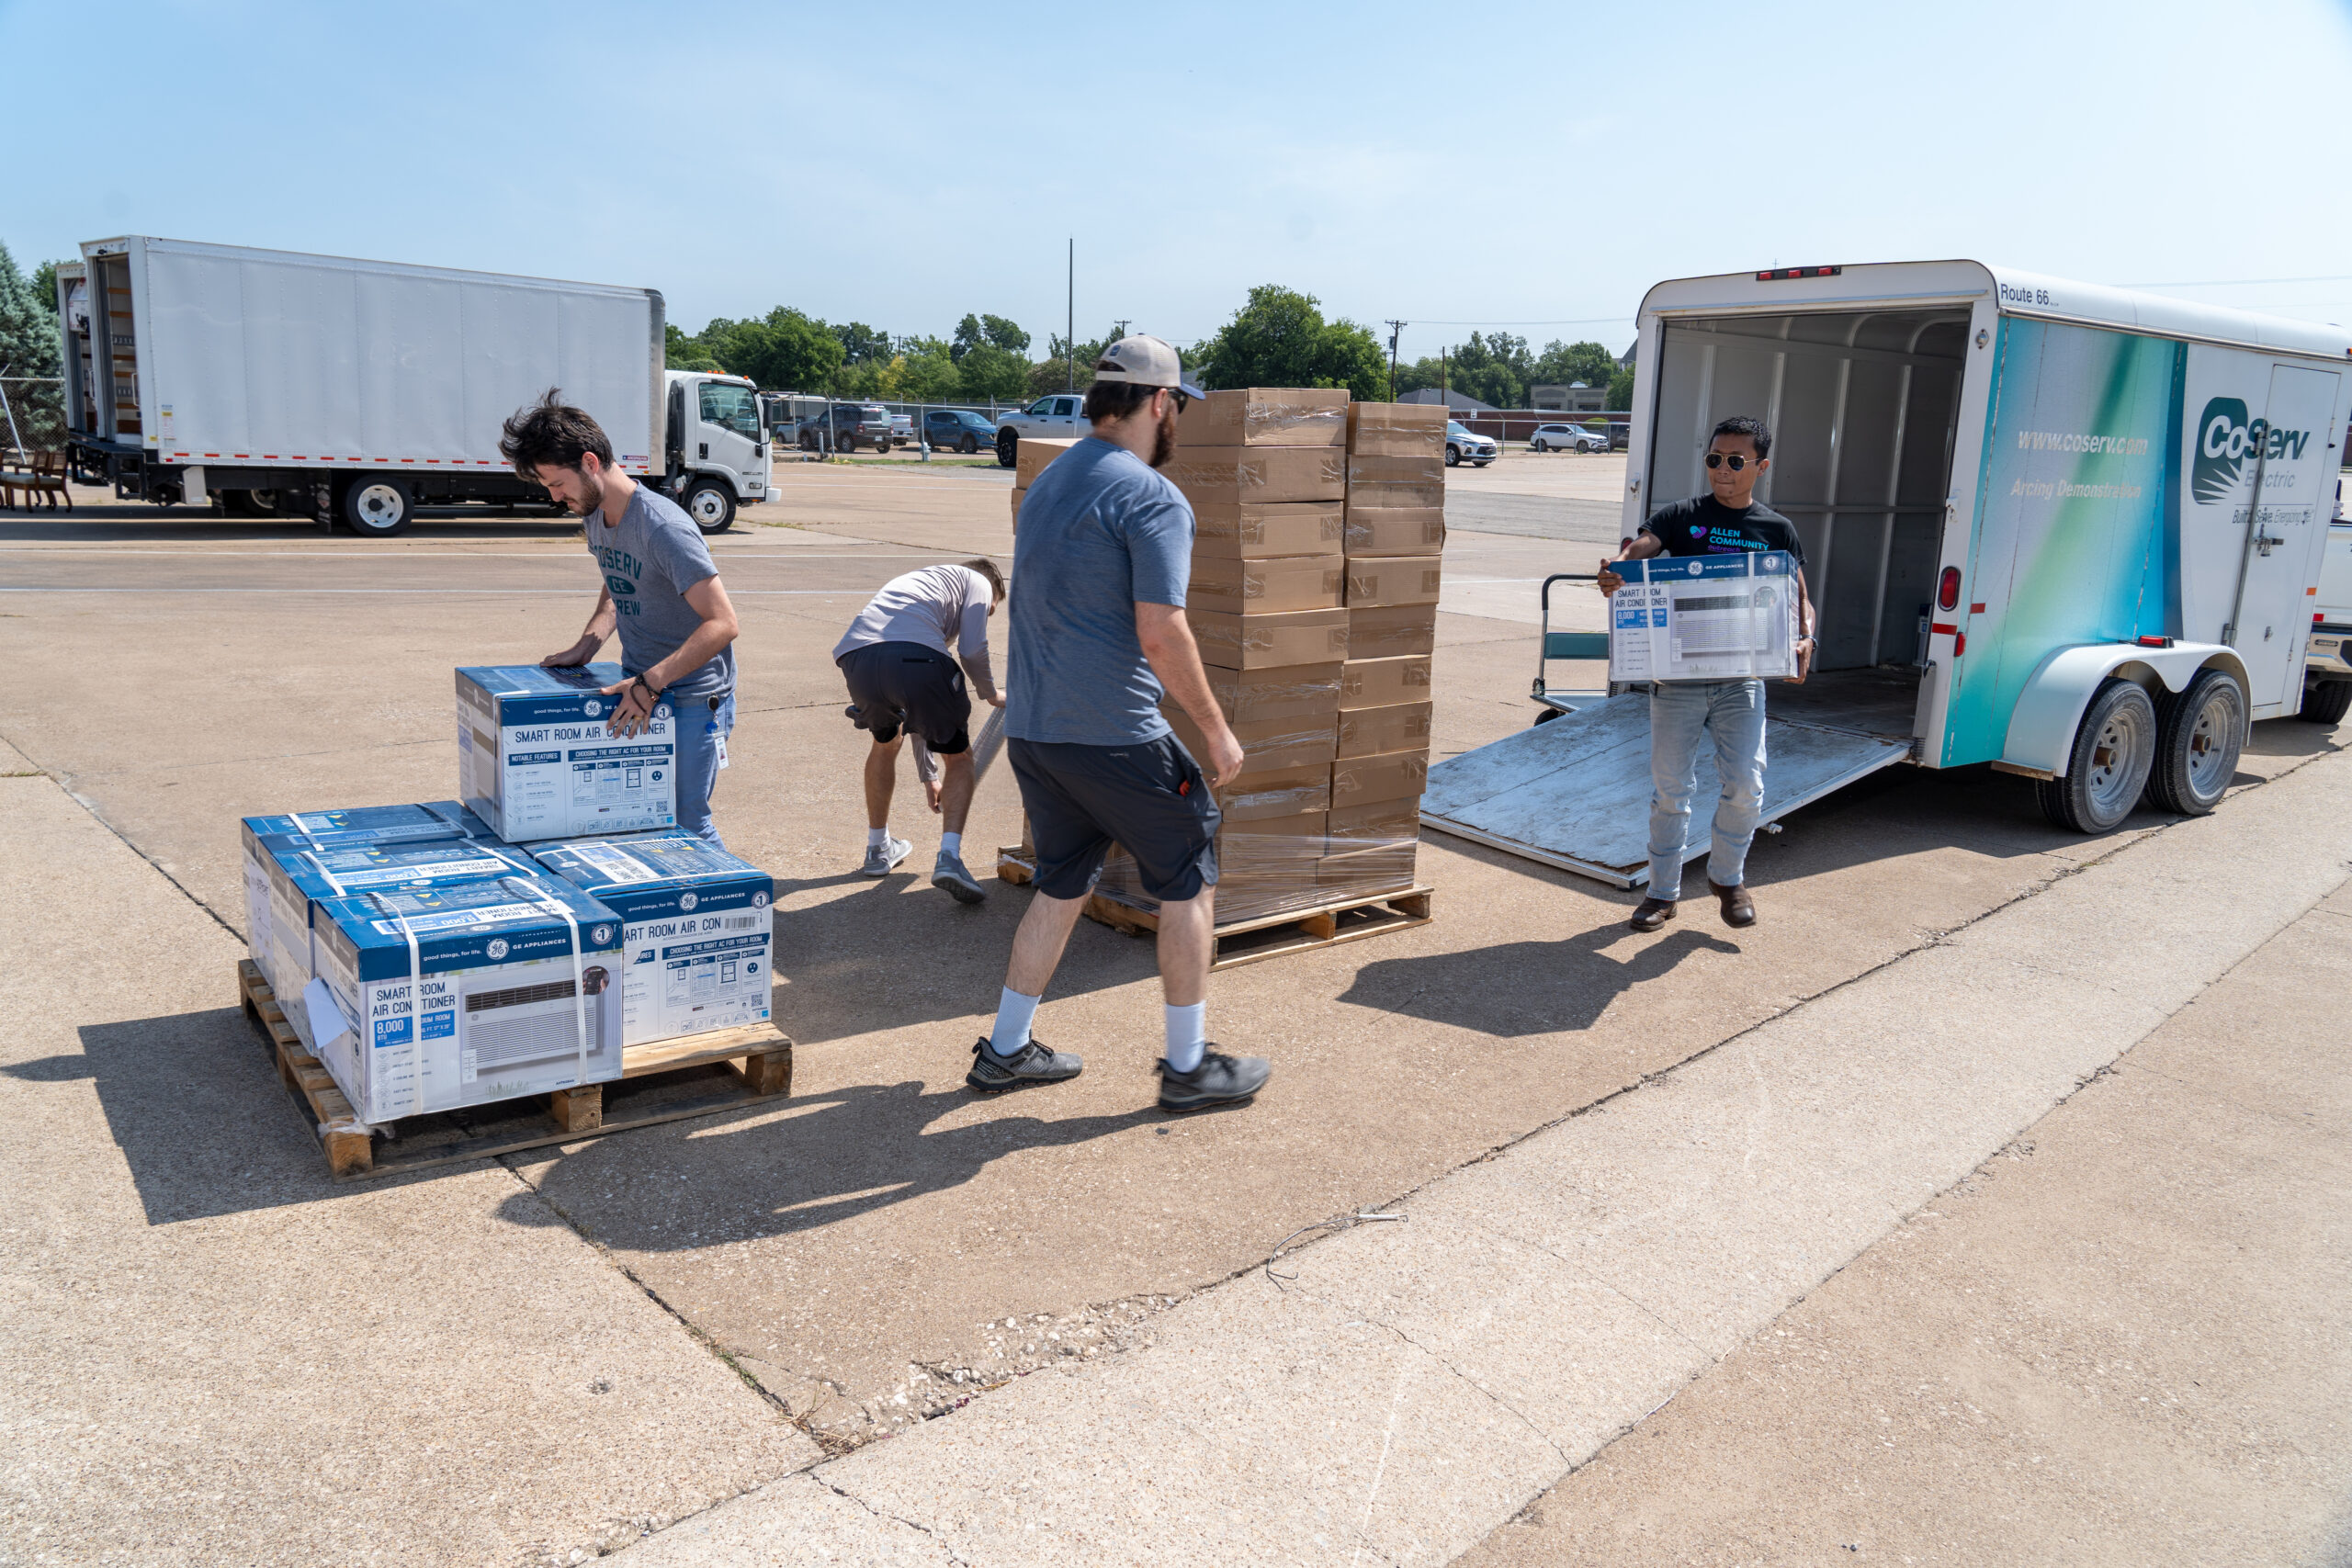 The CoServ Charitable Foundation delivers fans and AC Window units to All Community Outreach in Allen for distribution to families that need them. Photo by BRIAN ELLEDGE/CoServ